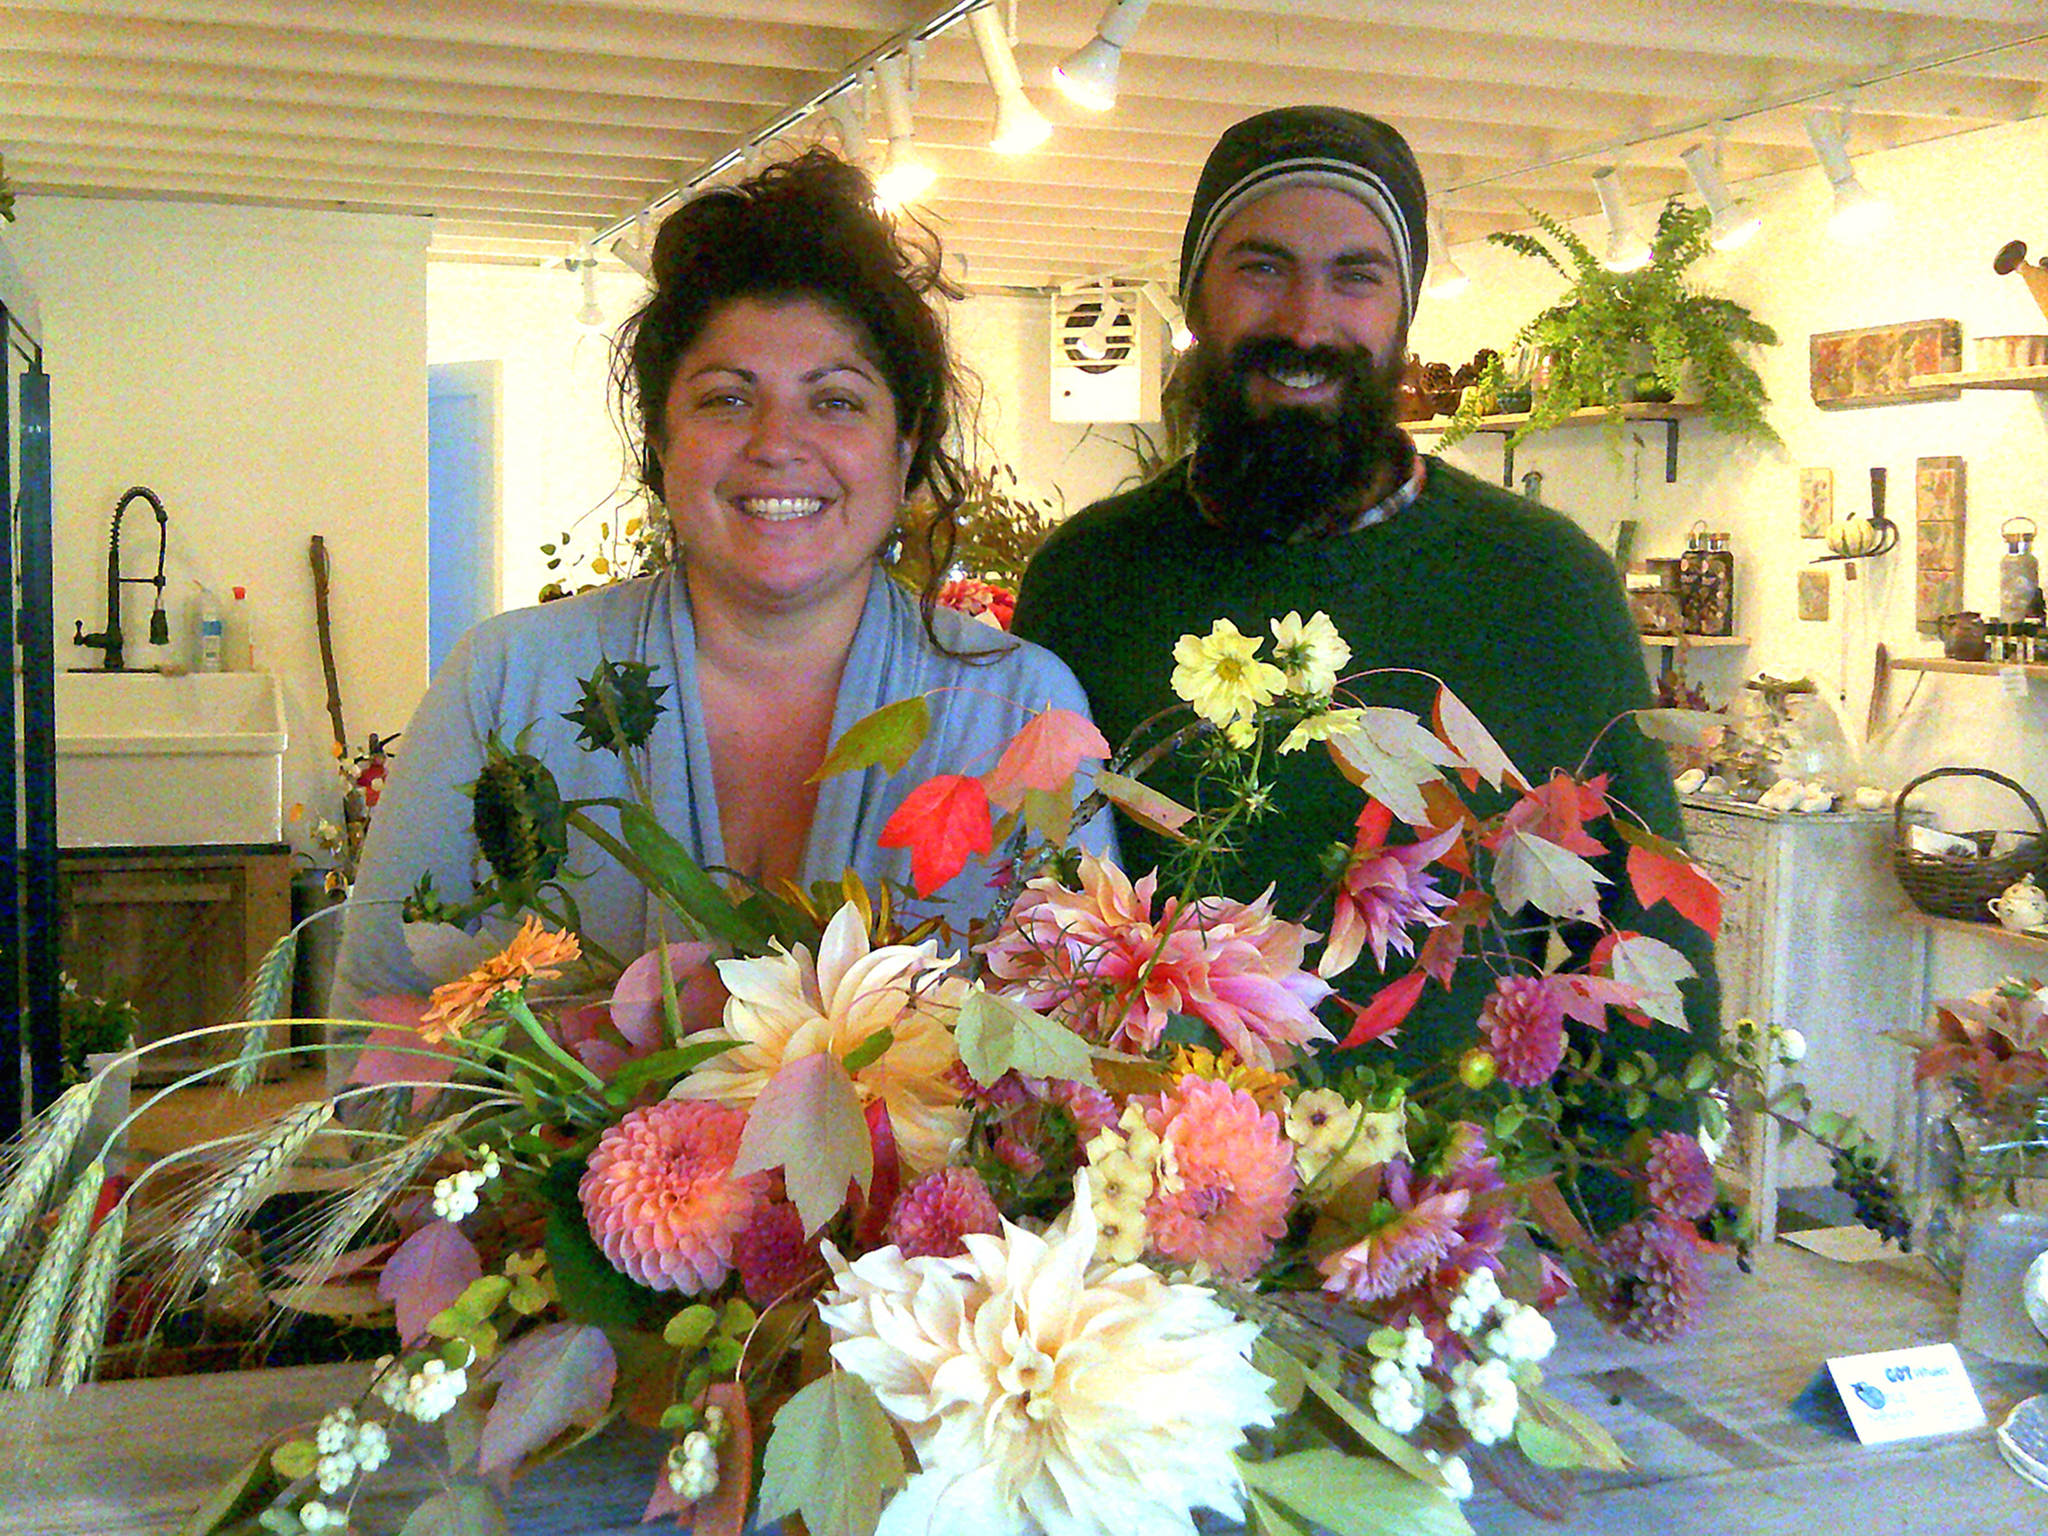 Langley flower shop was inspired by ‘farm, forest and the sea’